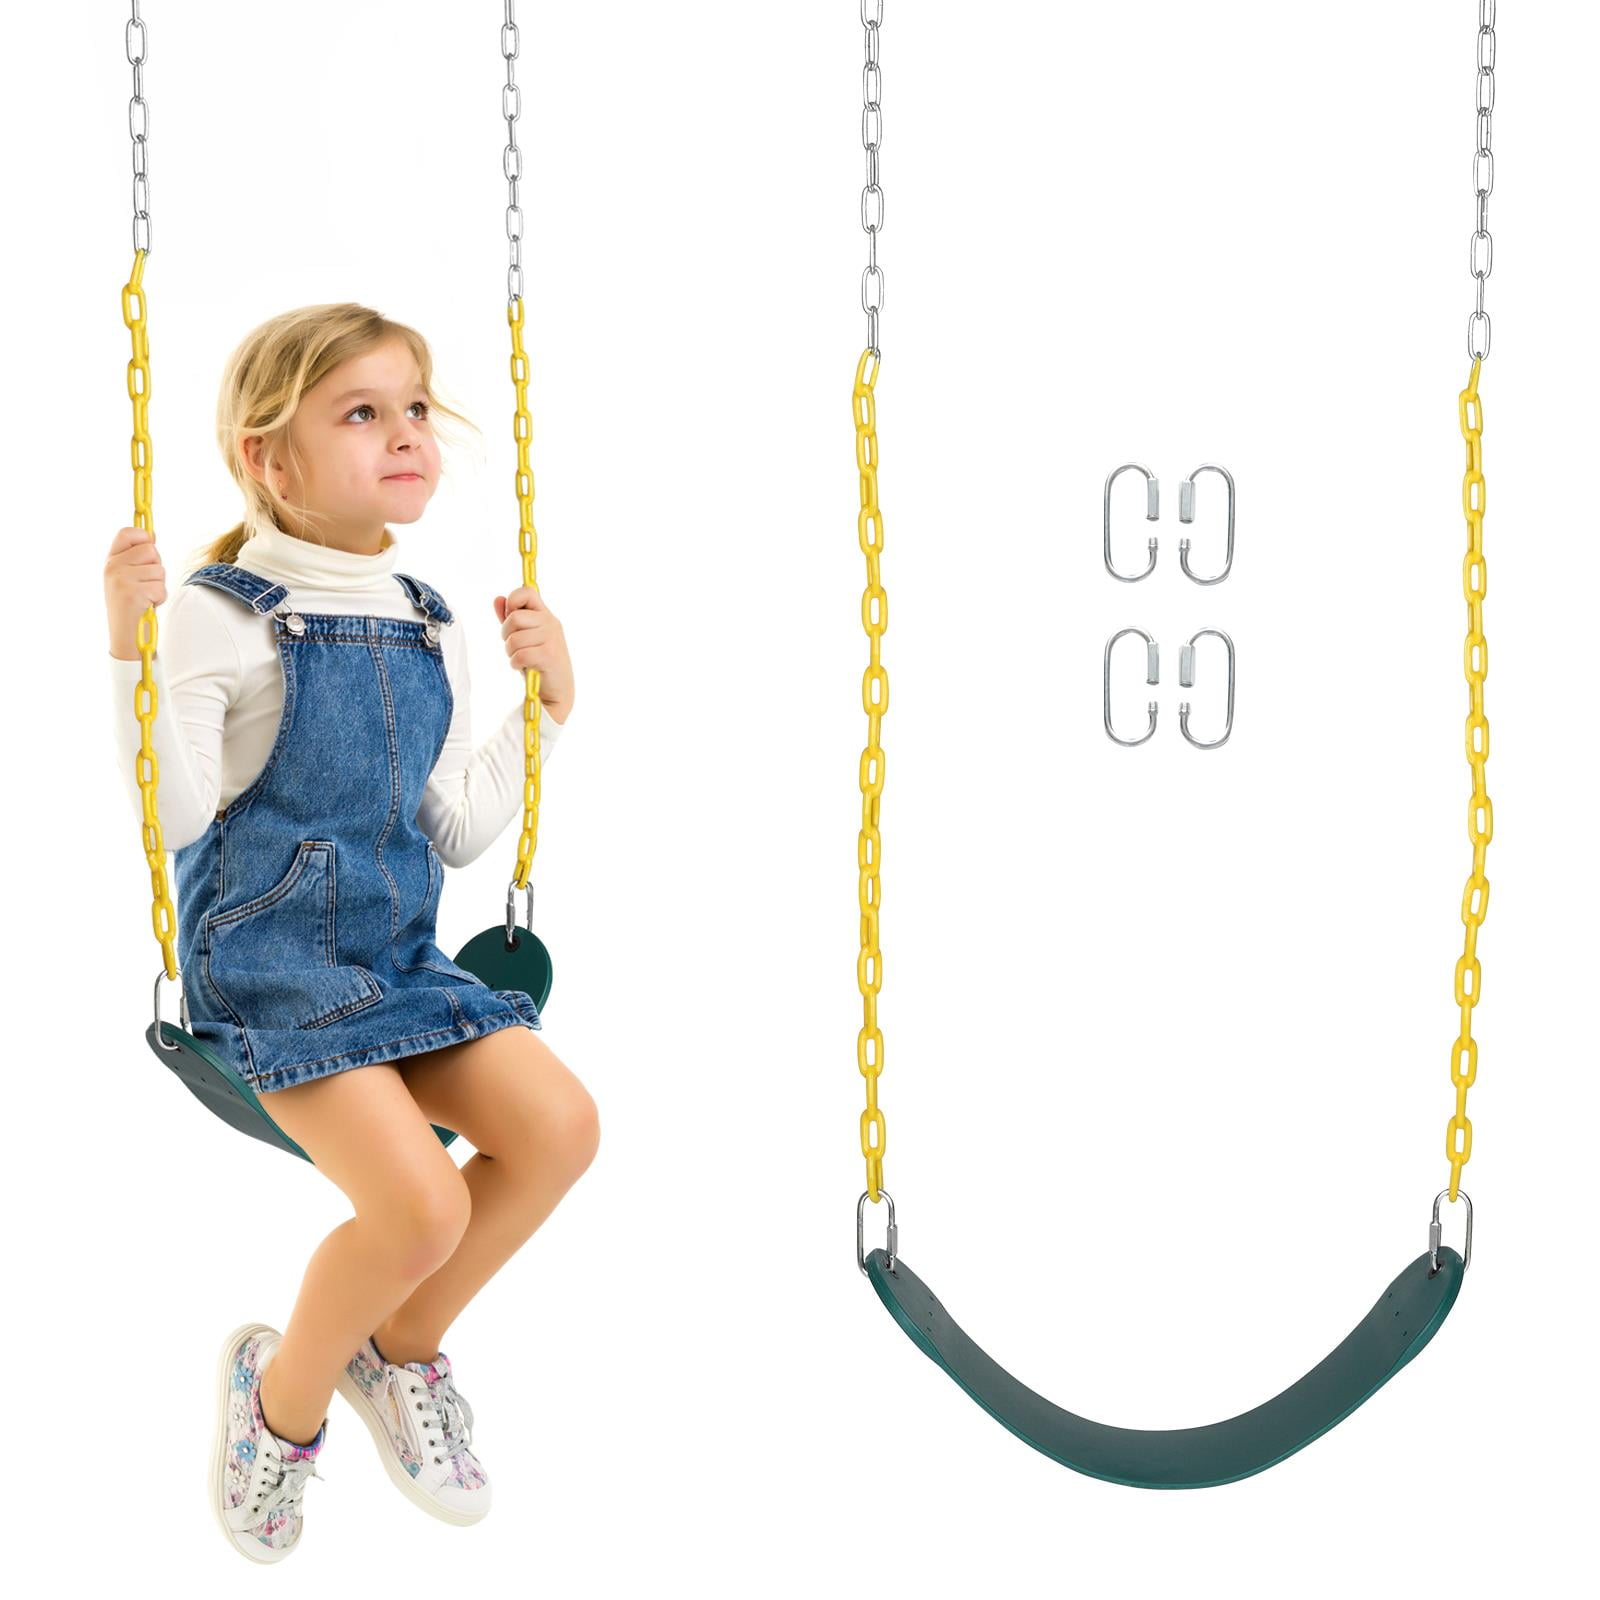 Heavy Duty Swing Seat-Swing Set Accessories Kids Play Safety with Coated Chain 